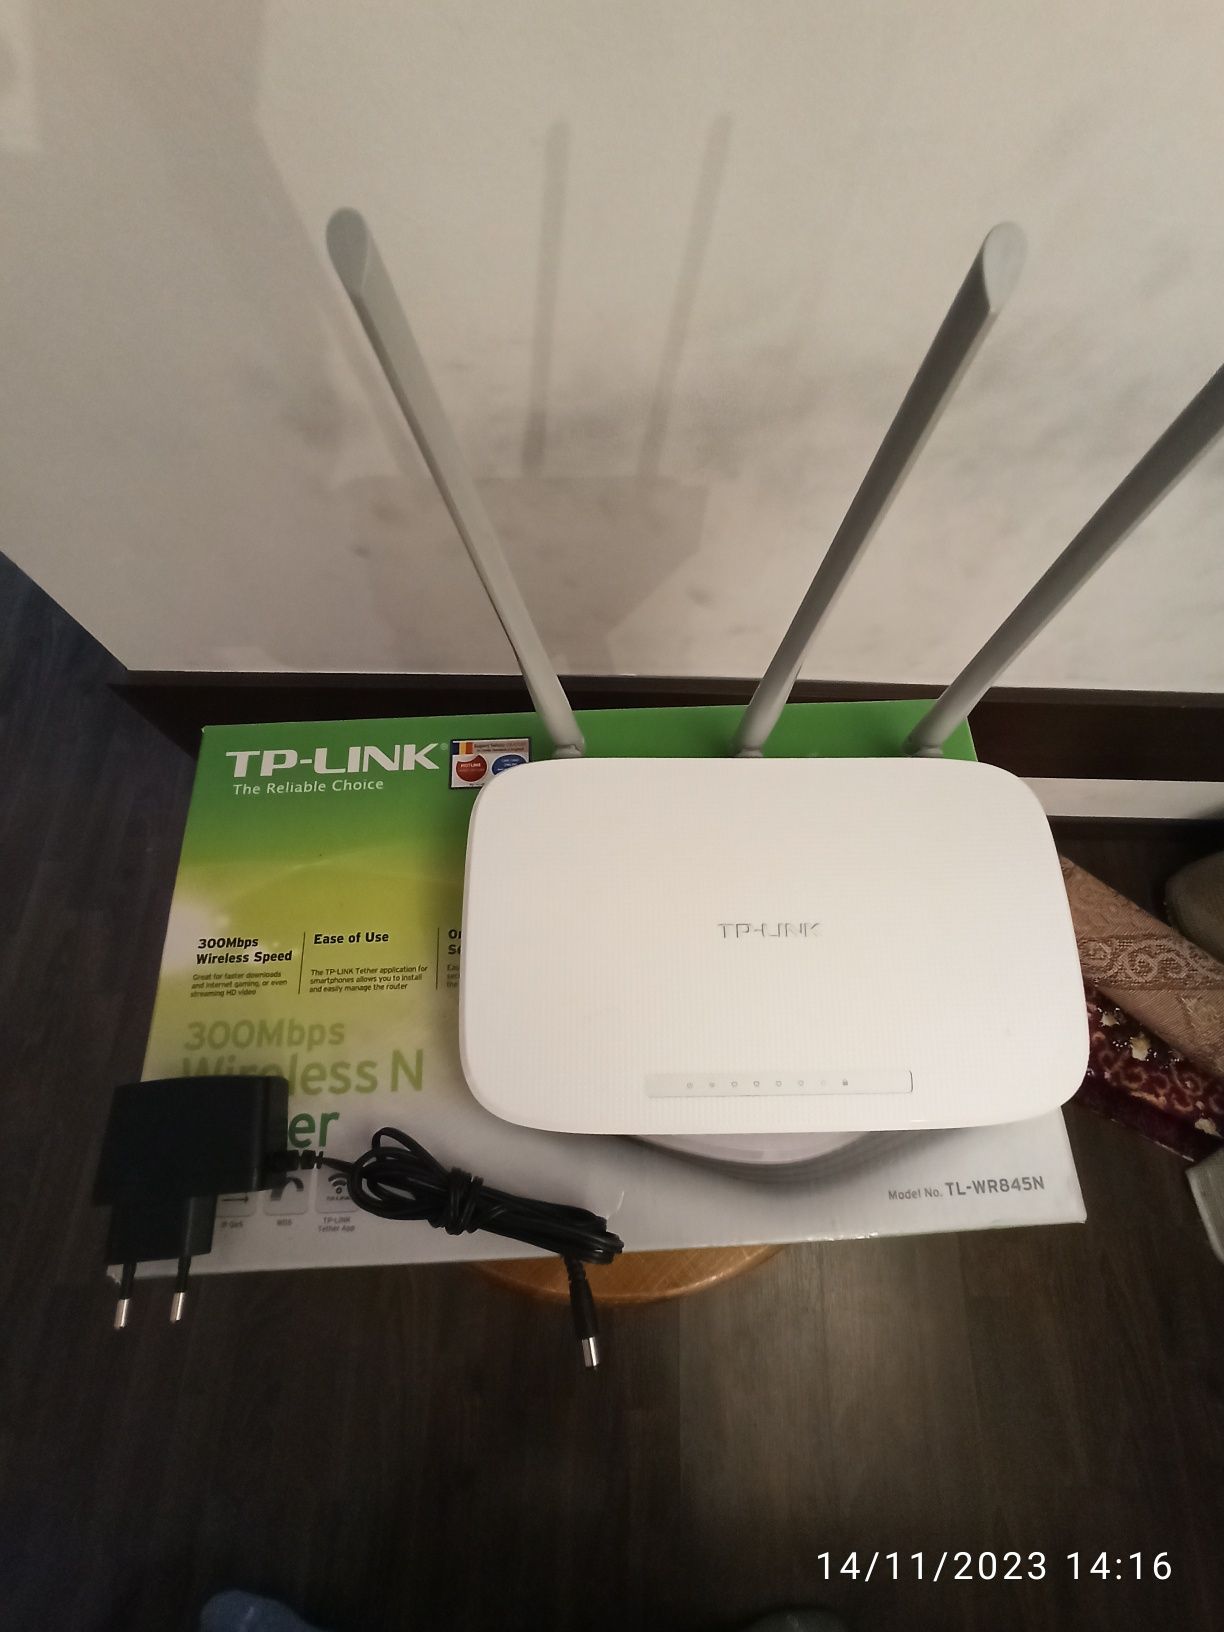 Vând router TP-LINK 300mbs